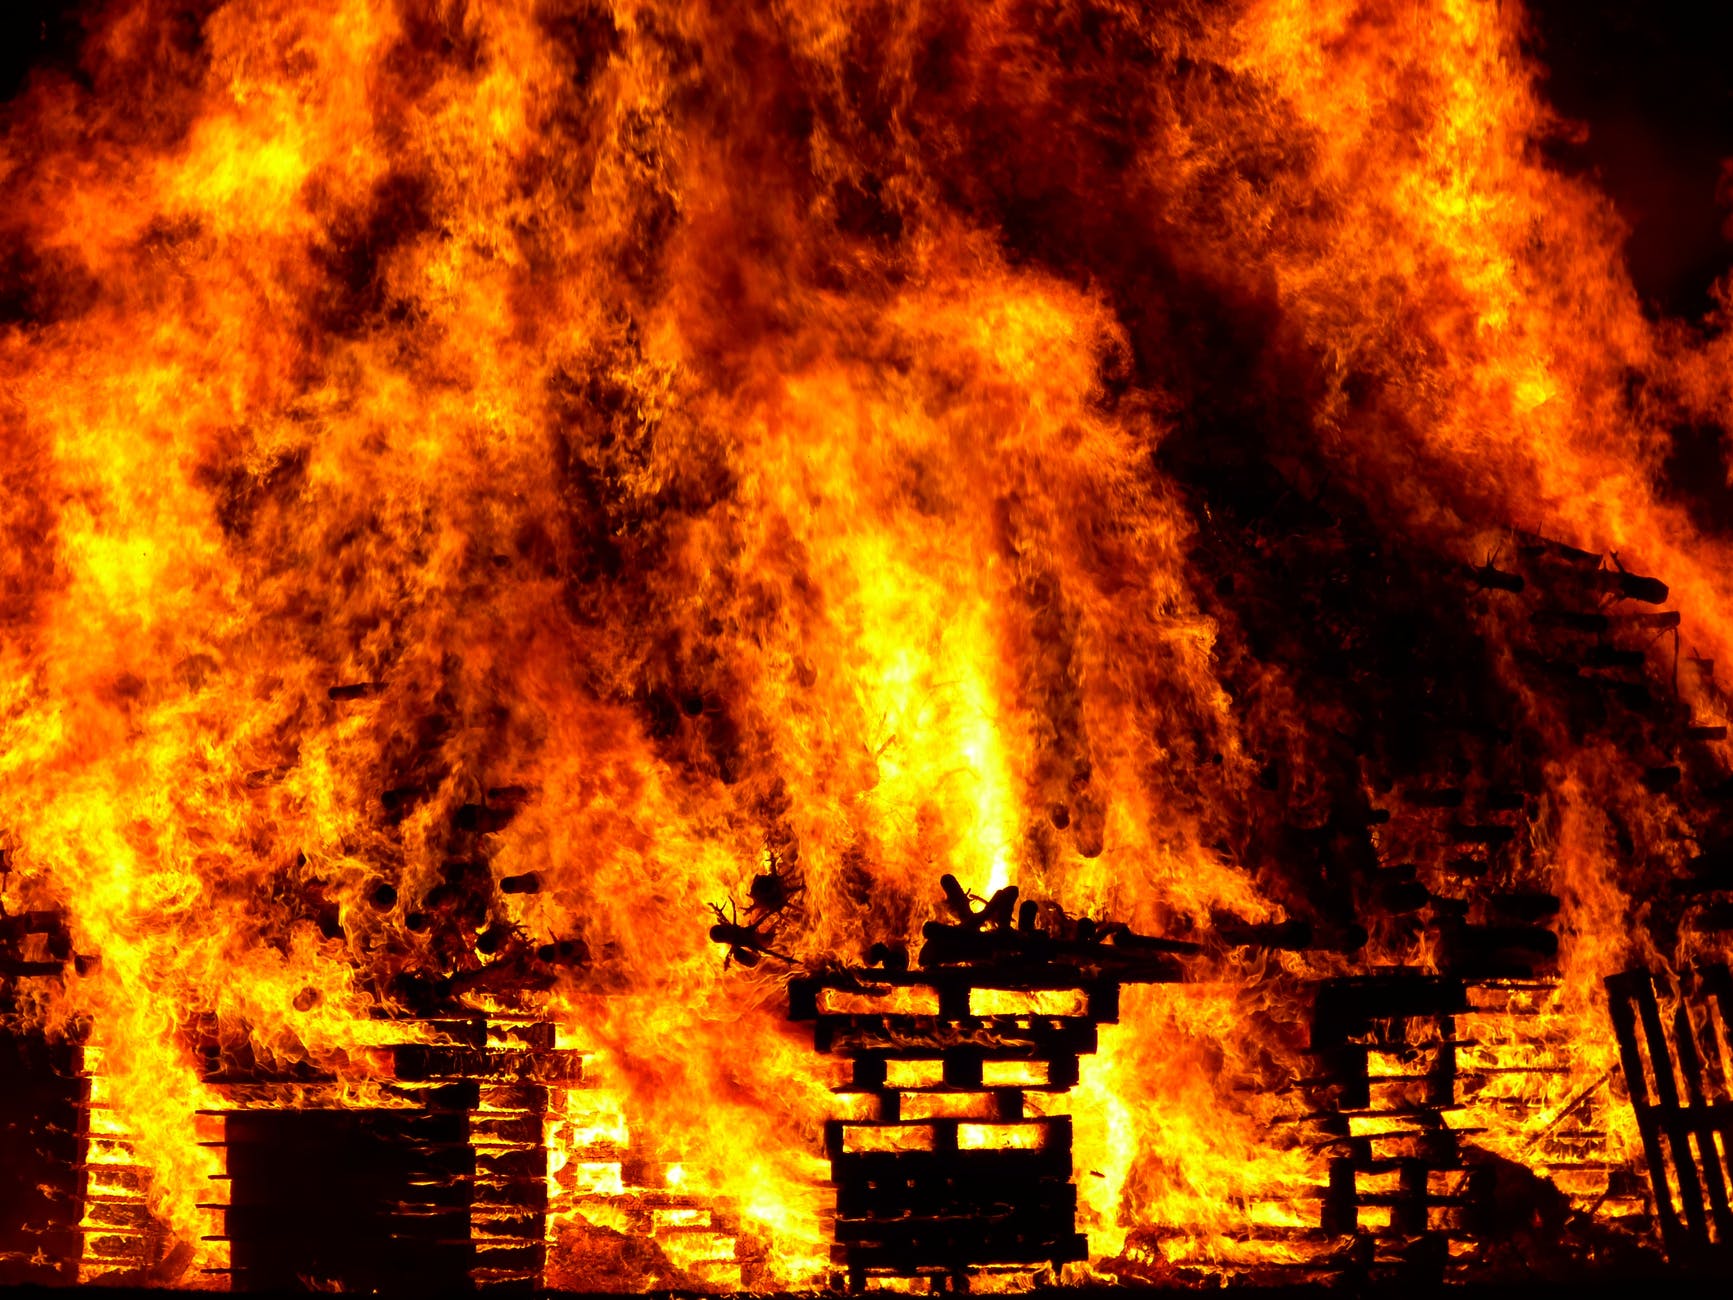 image of a structure on fire, engulfed in orange, yellow, and red flames